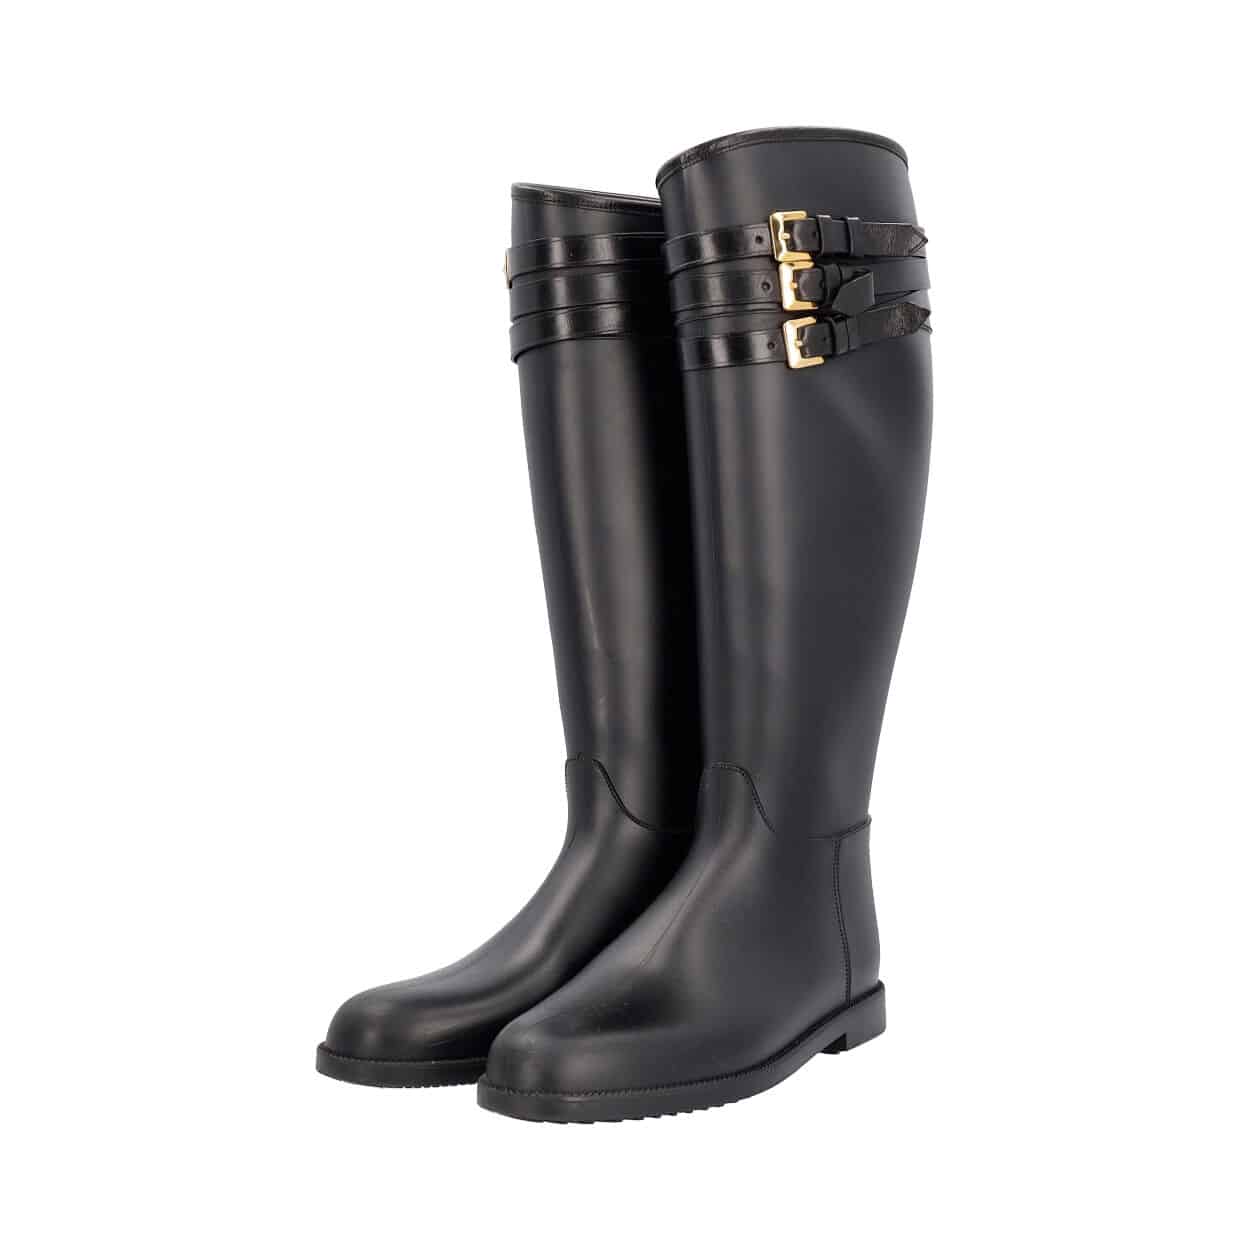 BURBERRY Rubber Equestrian Rain Boots Black | Luxity